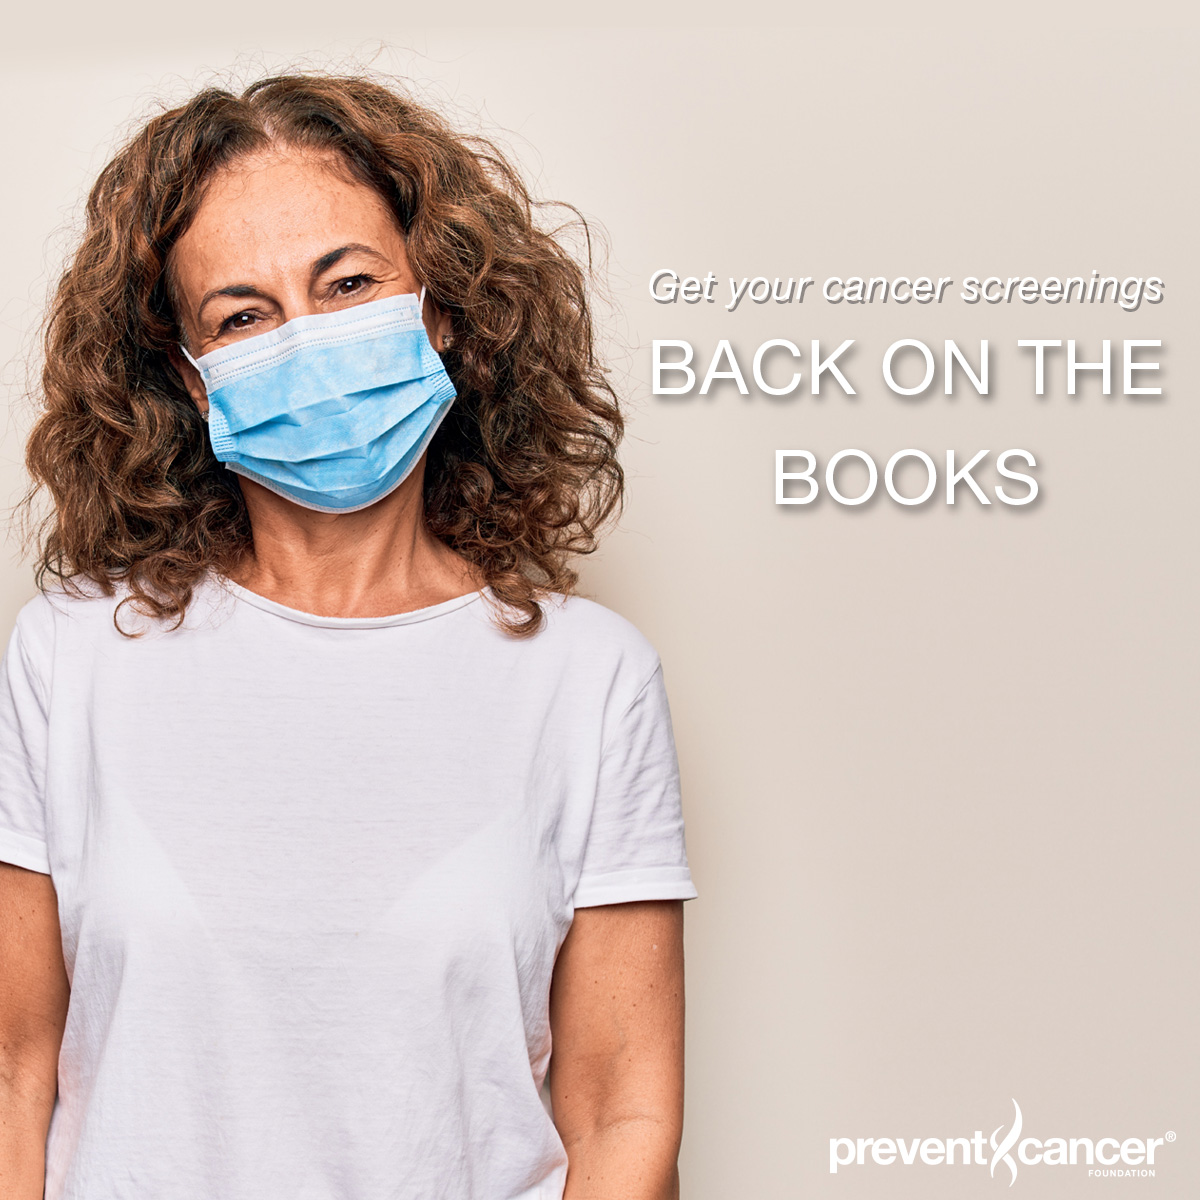 Why It's Important to Get Your Cancer Screenings Back on the Books